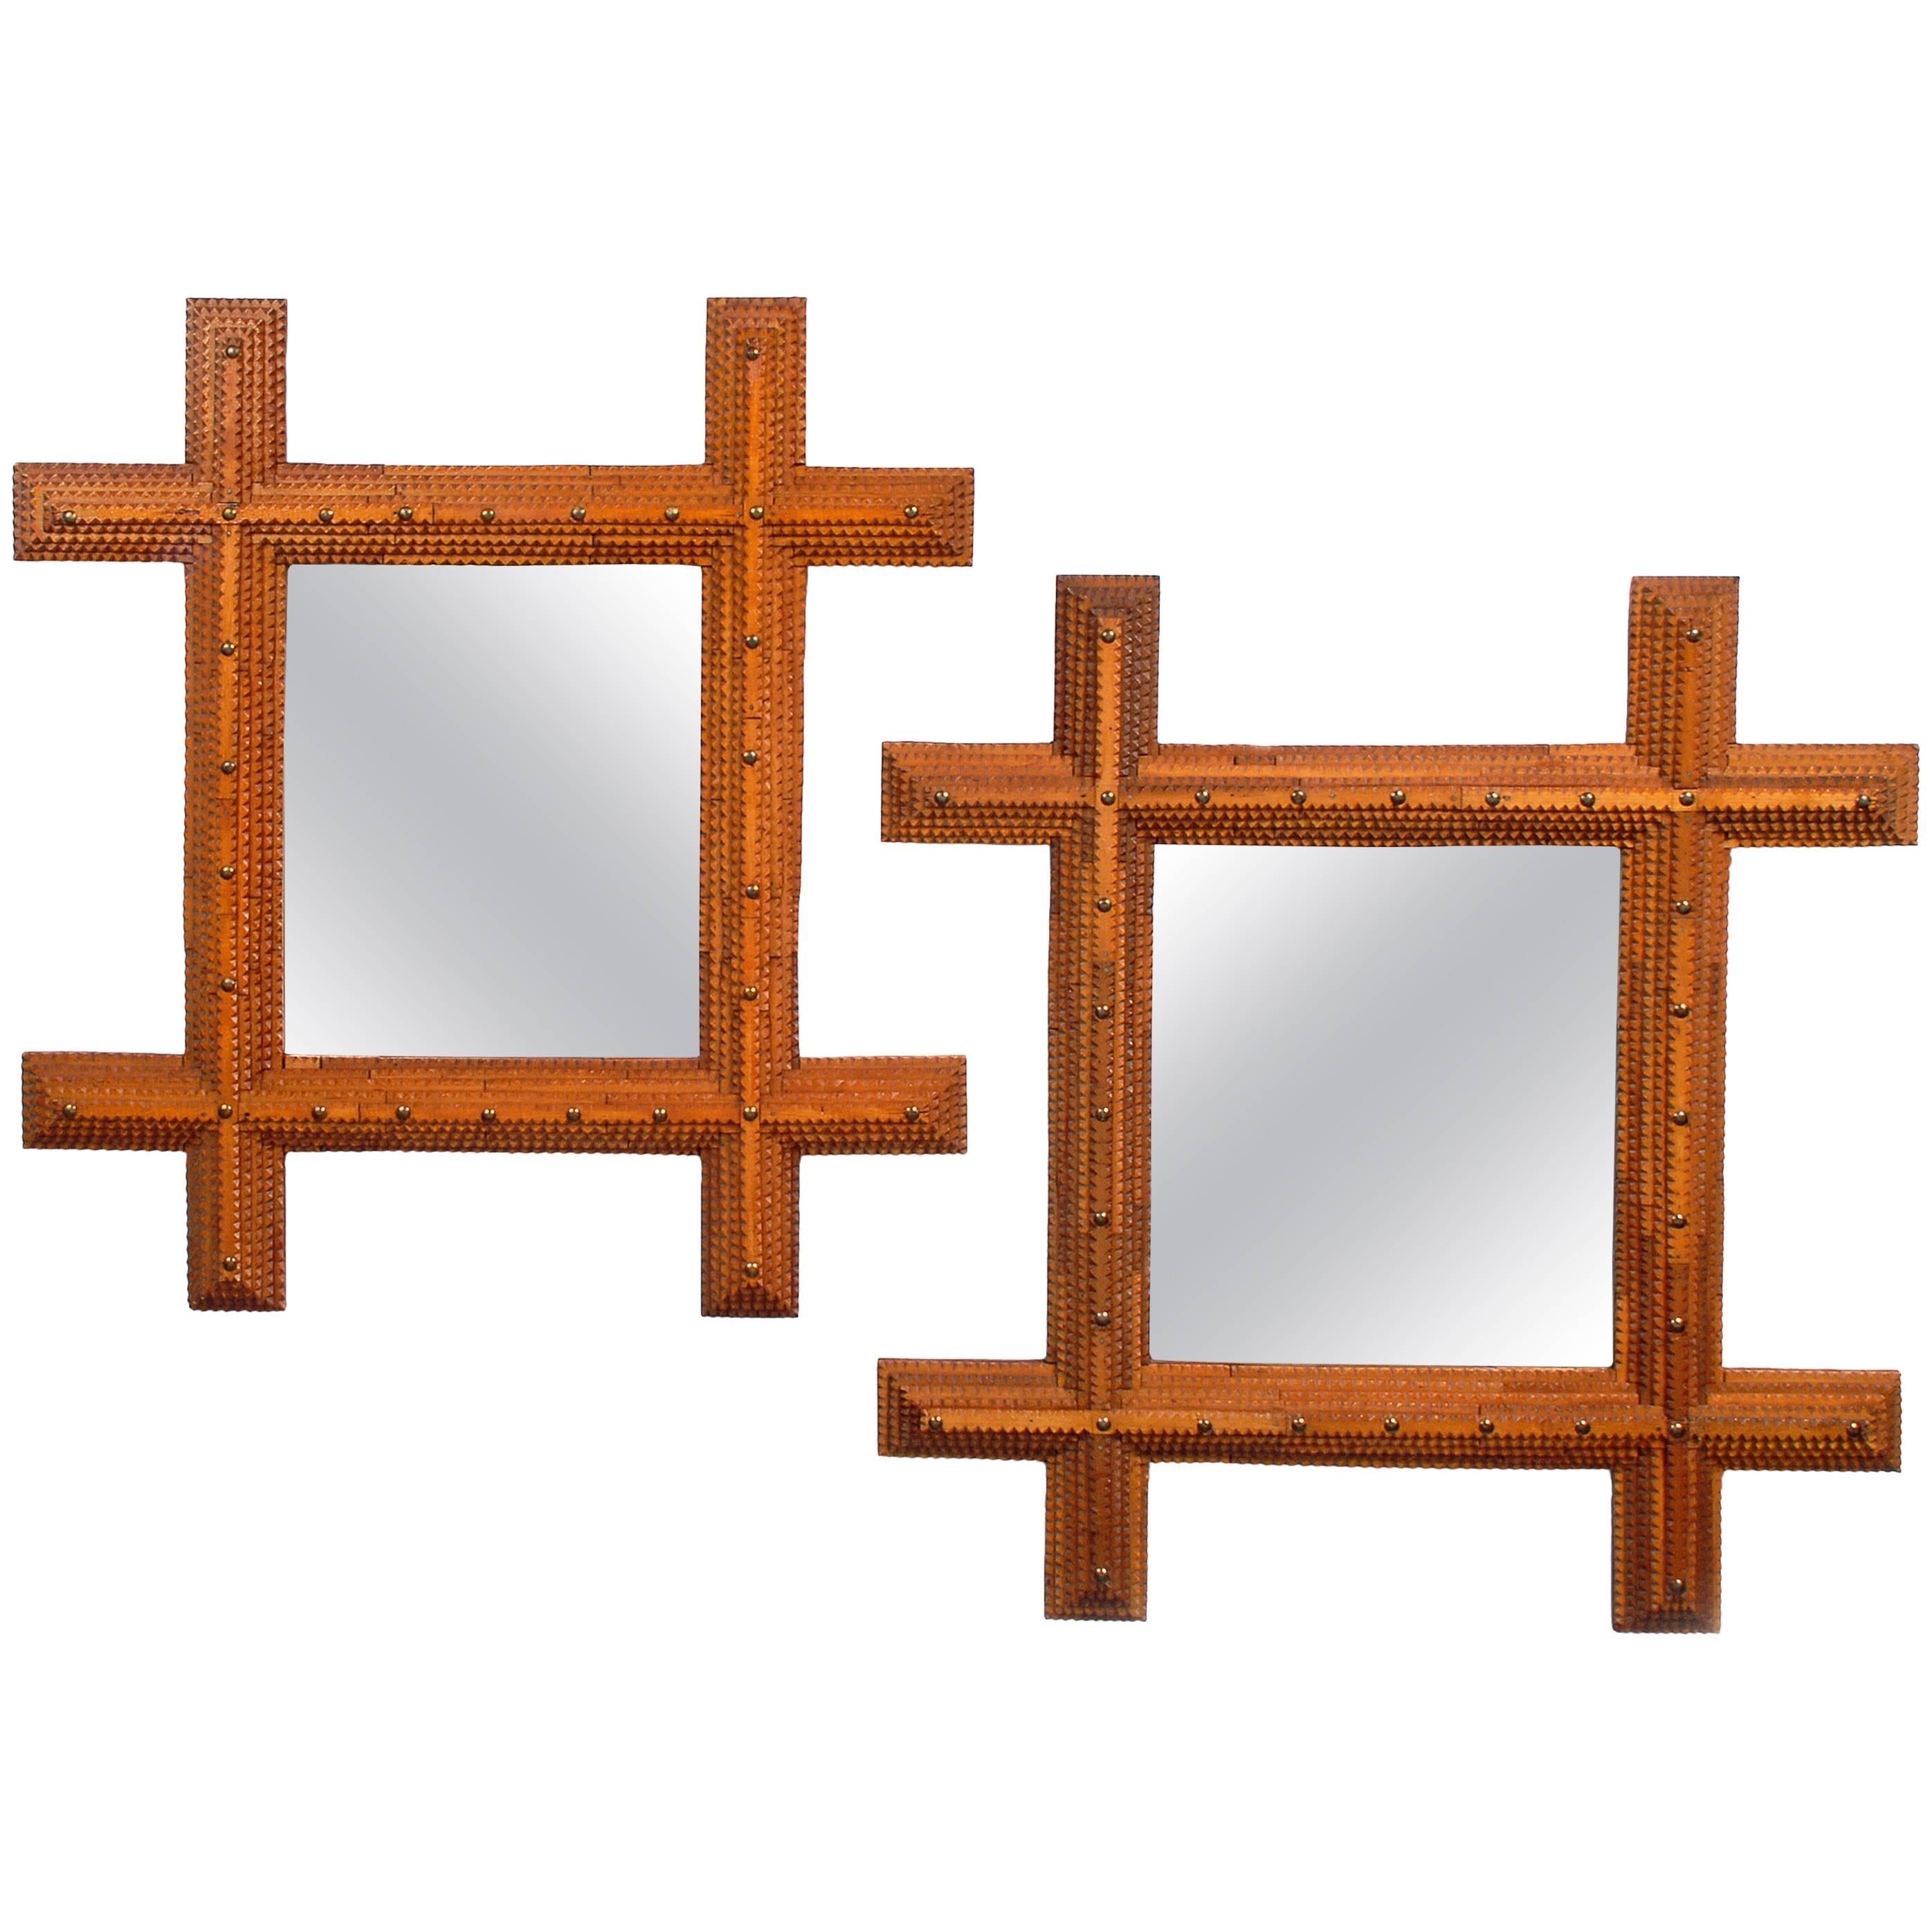 Companion Pair of Tramp Art Mirrors For Sale